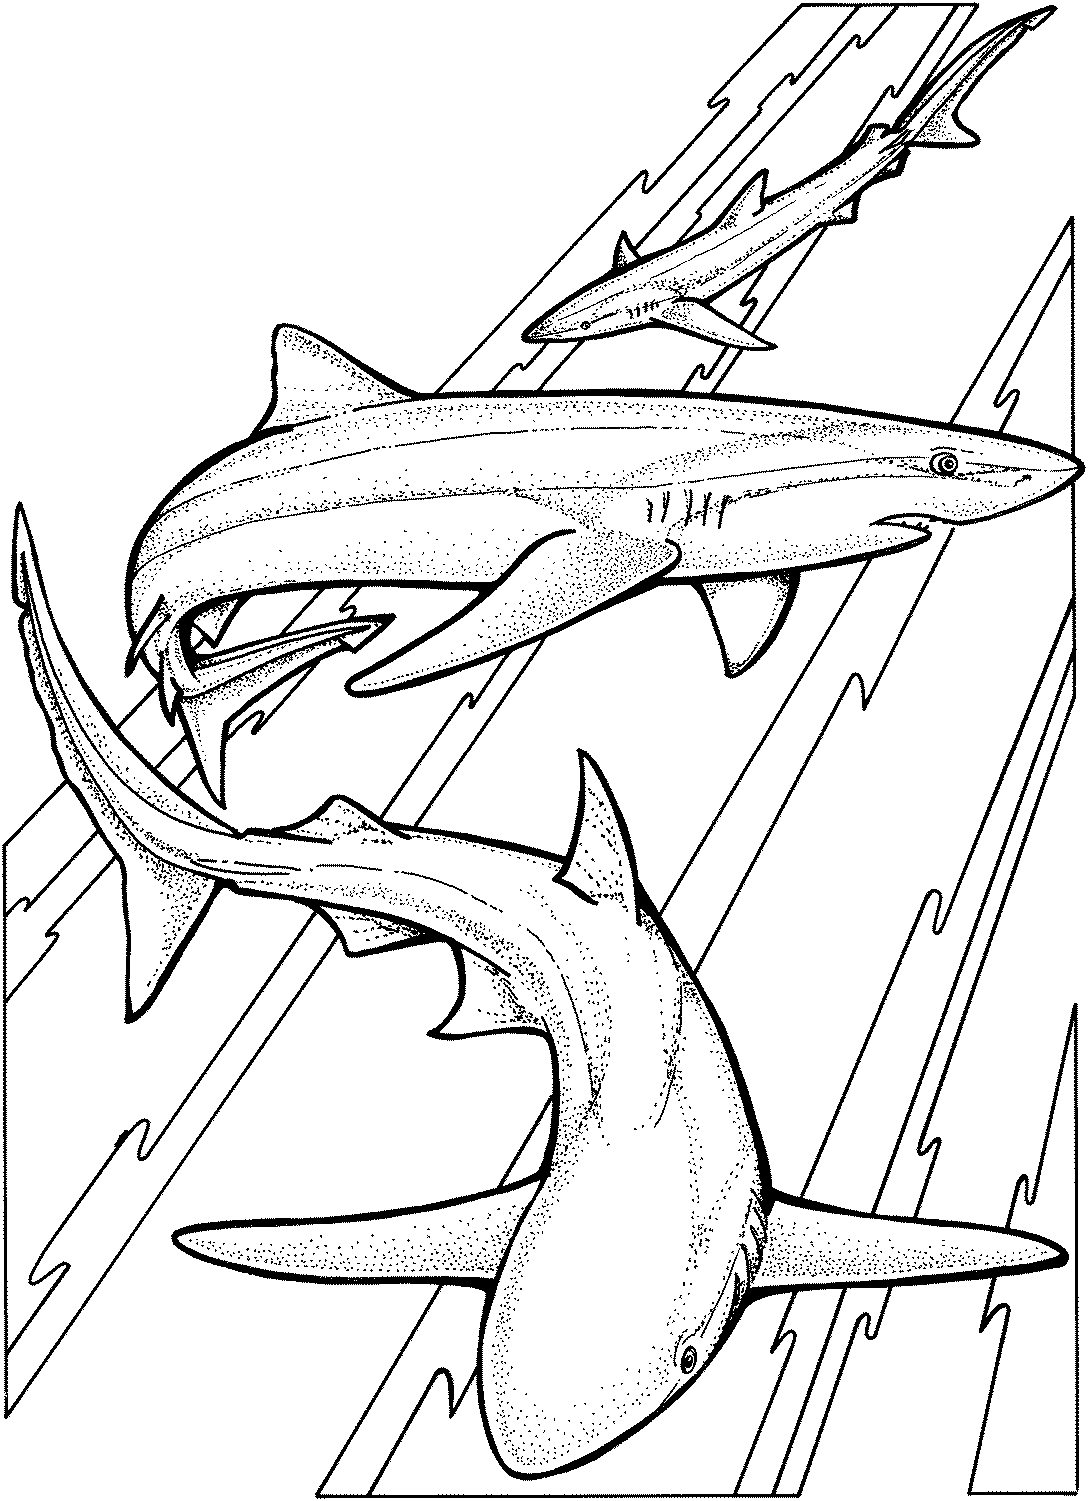 coloring page of shark shark drawing template at getdrawingscom free for of page shark coloring 